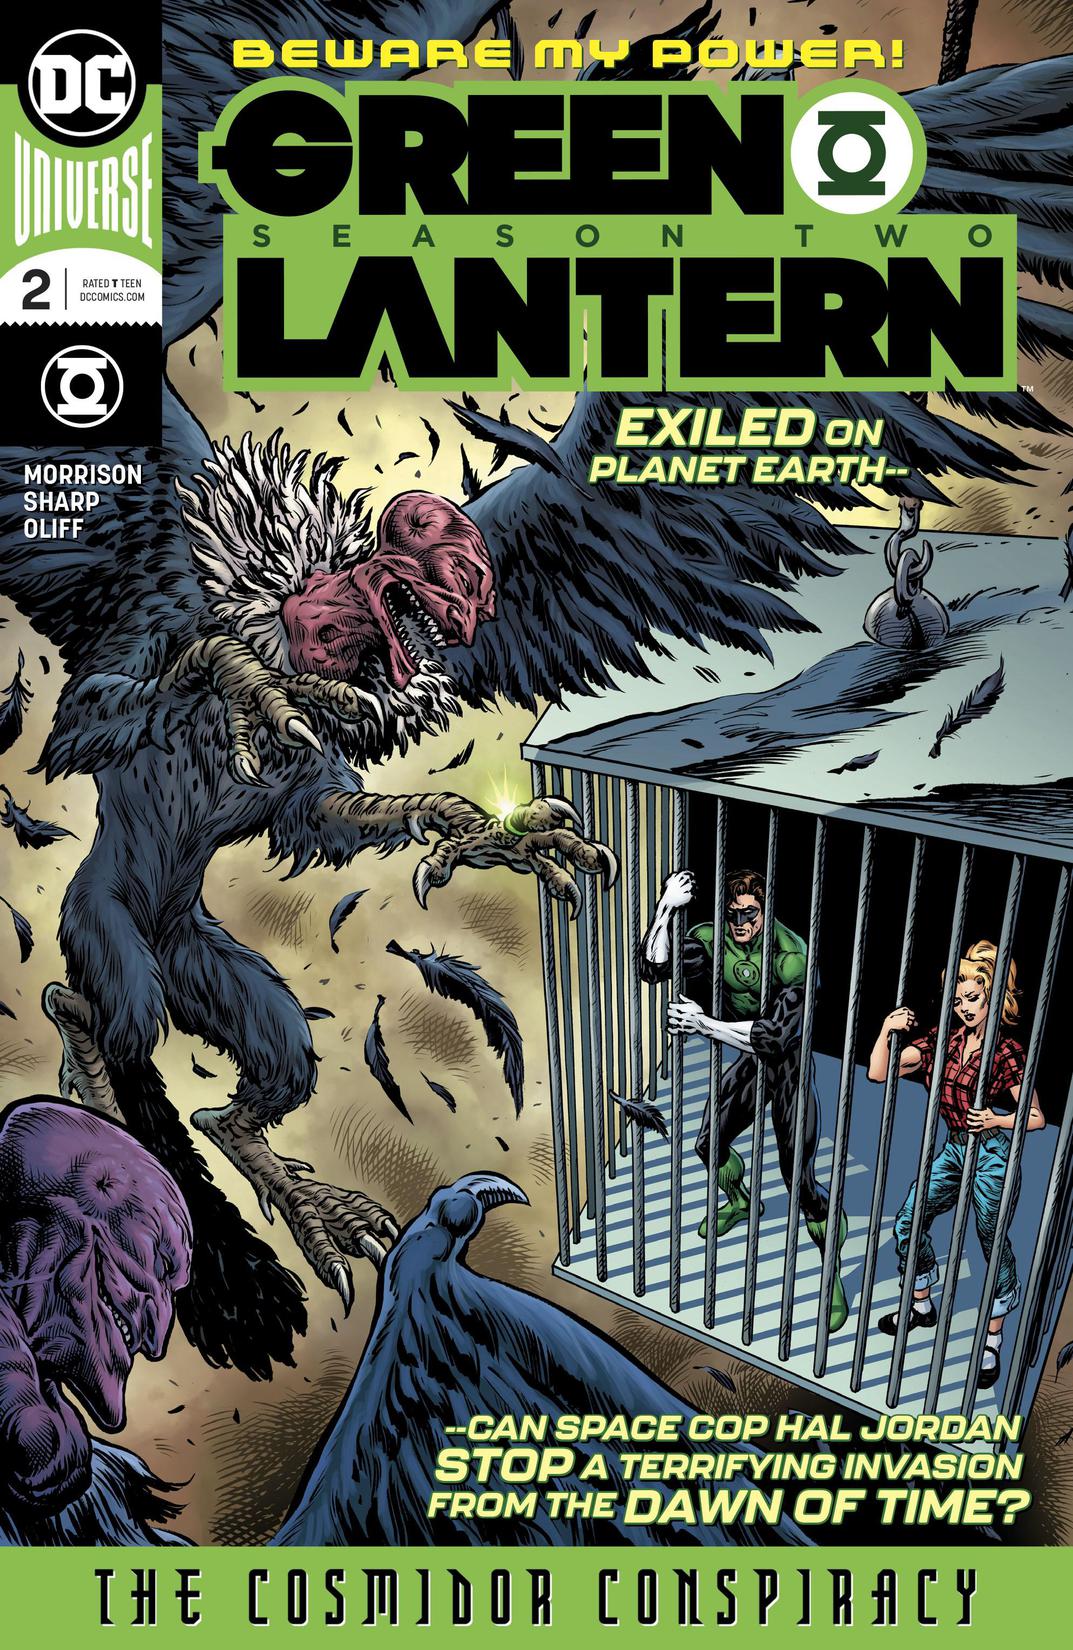 The Green Lantern Season Two #2 preview images